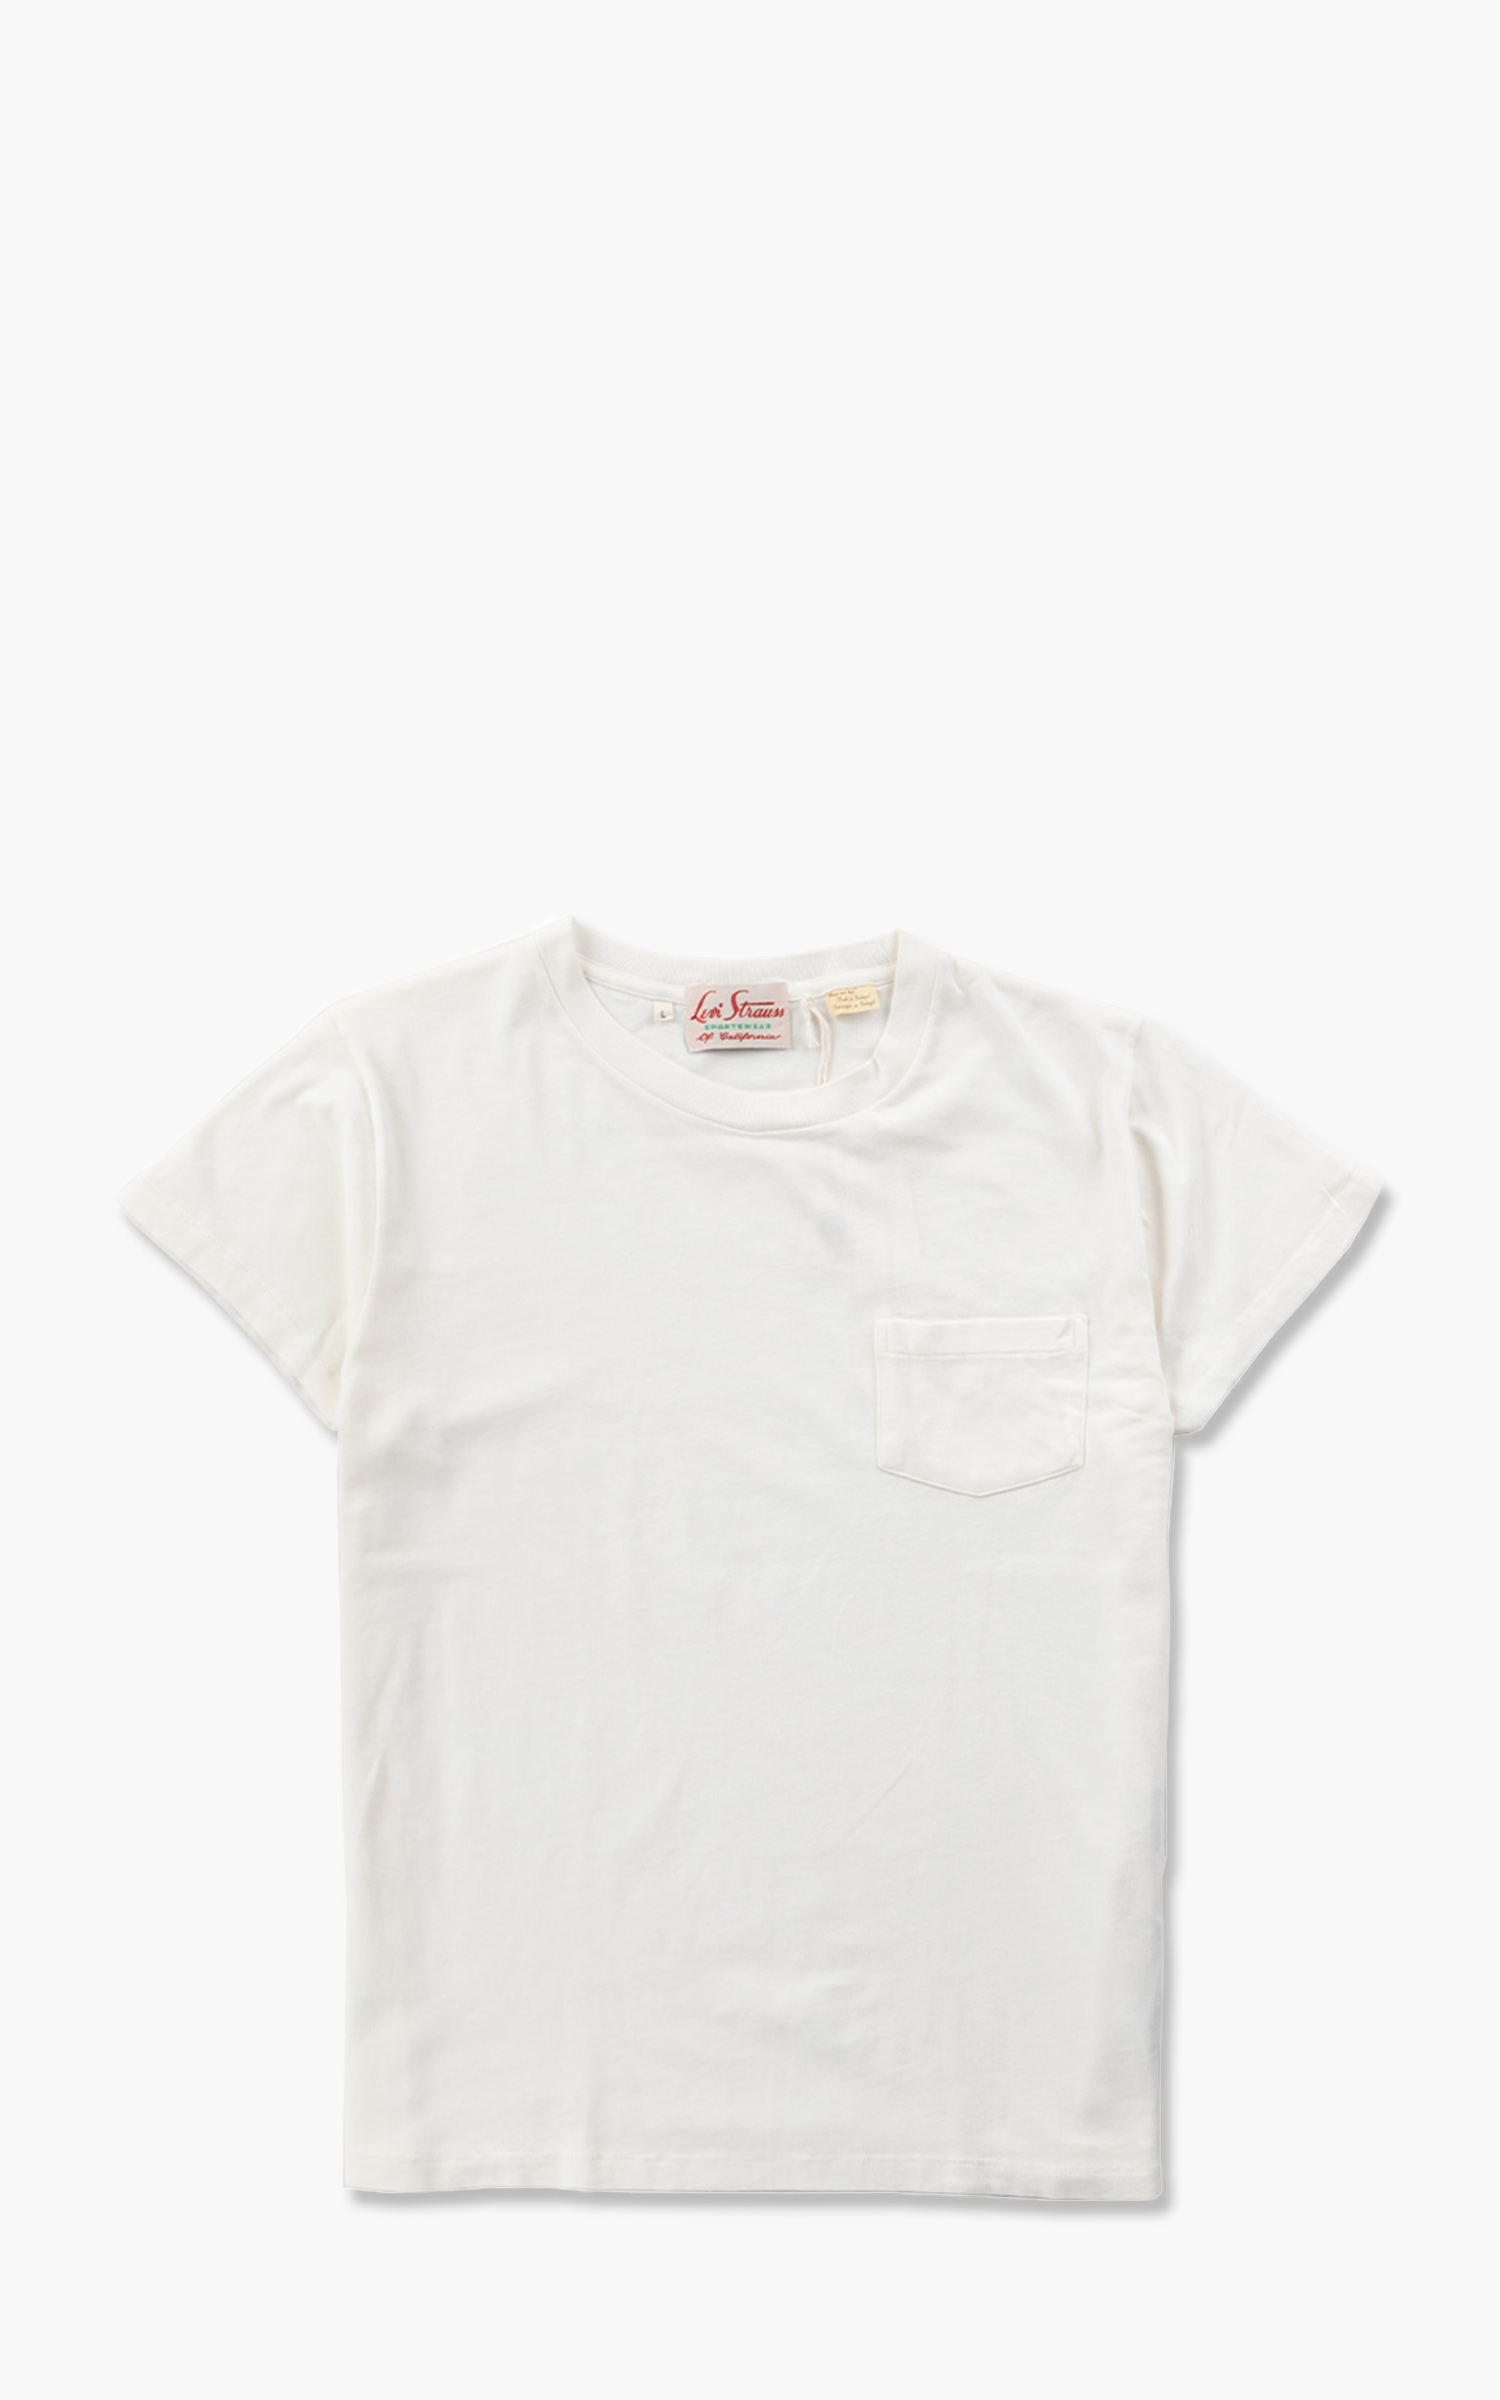 Levi's® Vintage Clothing 1950s Sportswear Tee White | Cultizm